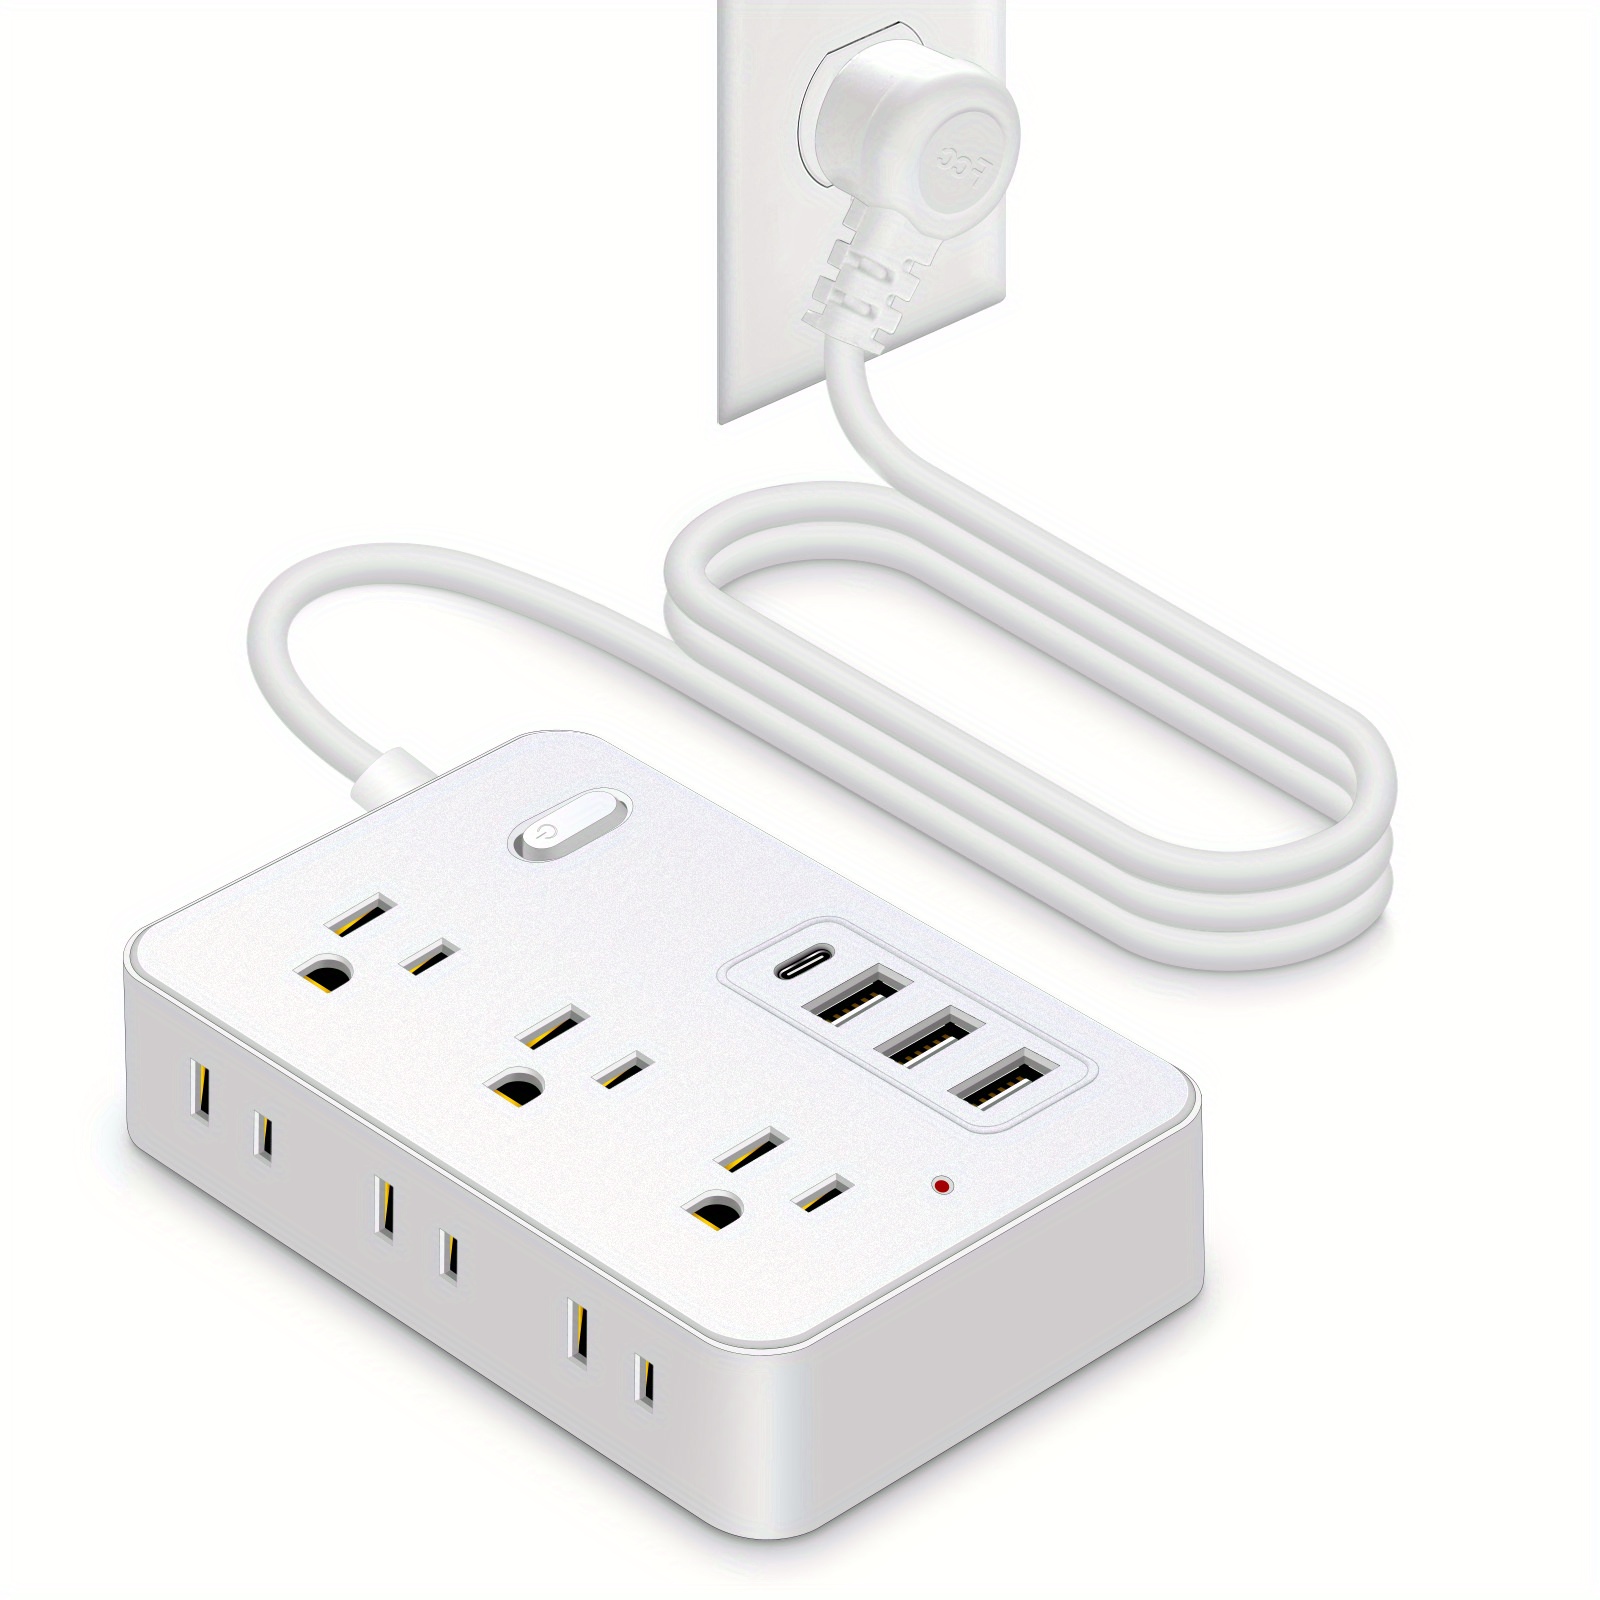 Extension Cord Usb, Power Outlet With 3 Outlets 4 Usb Charging